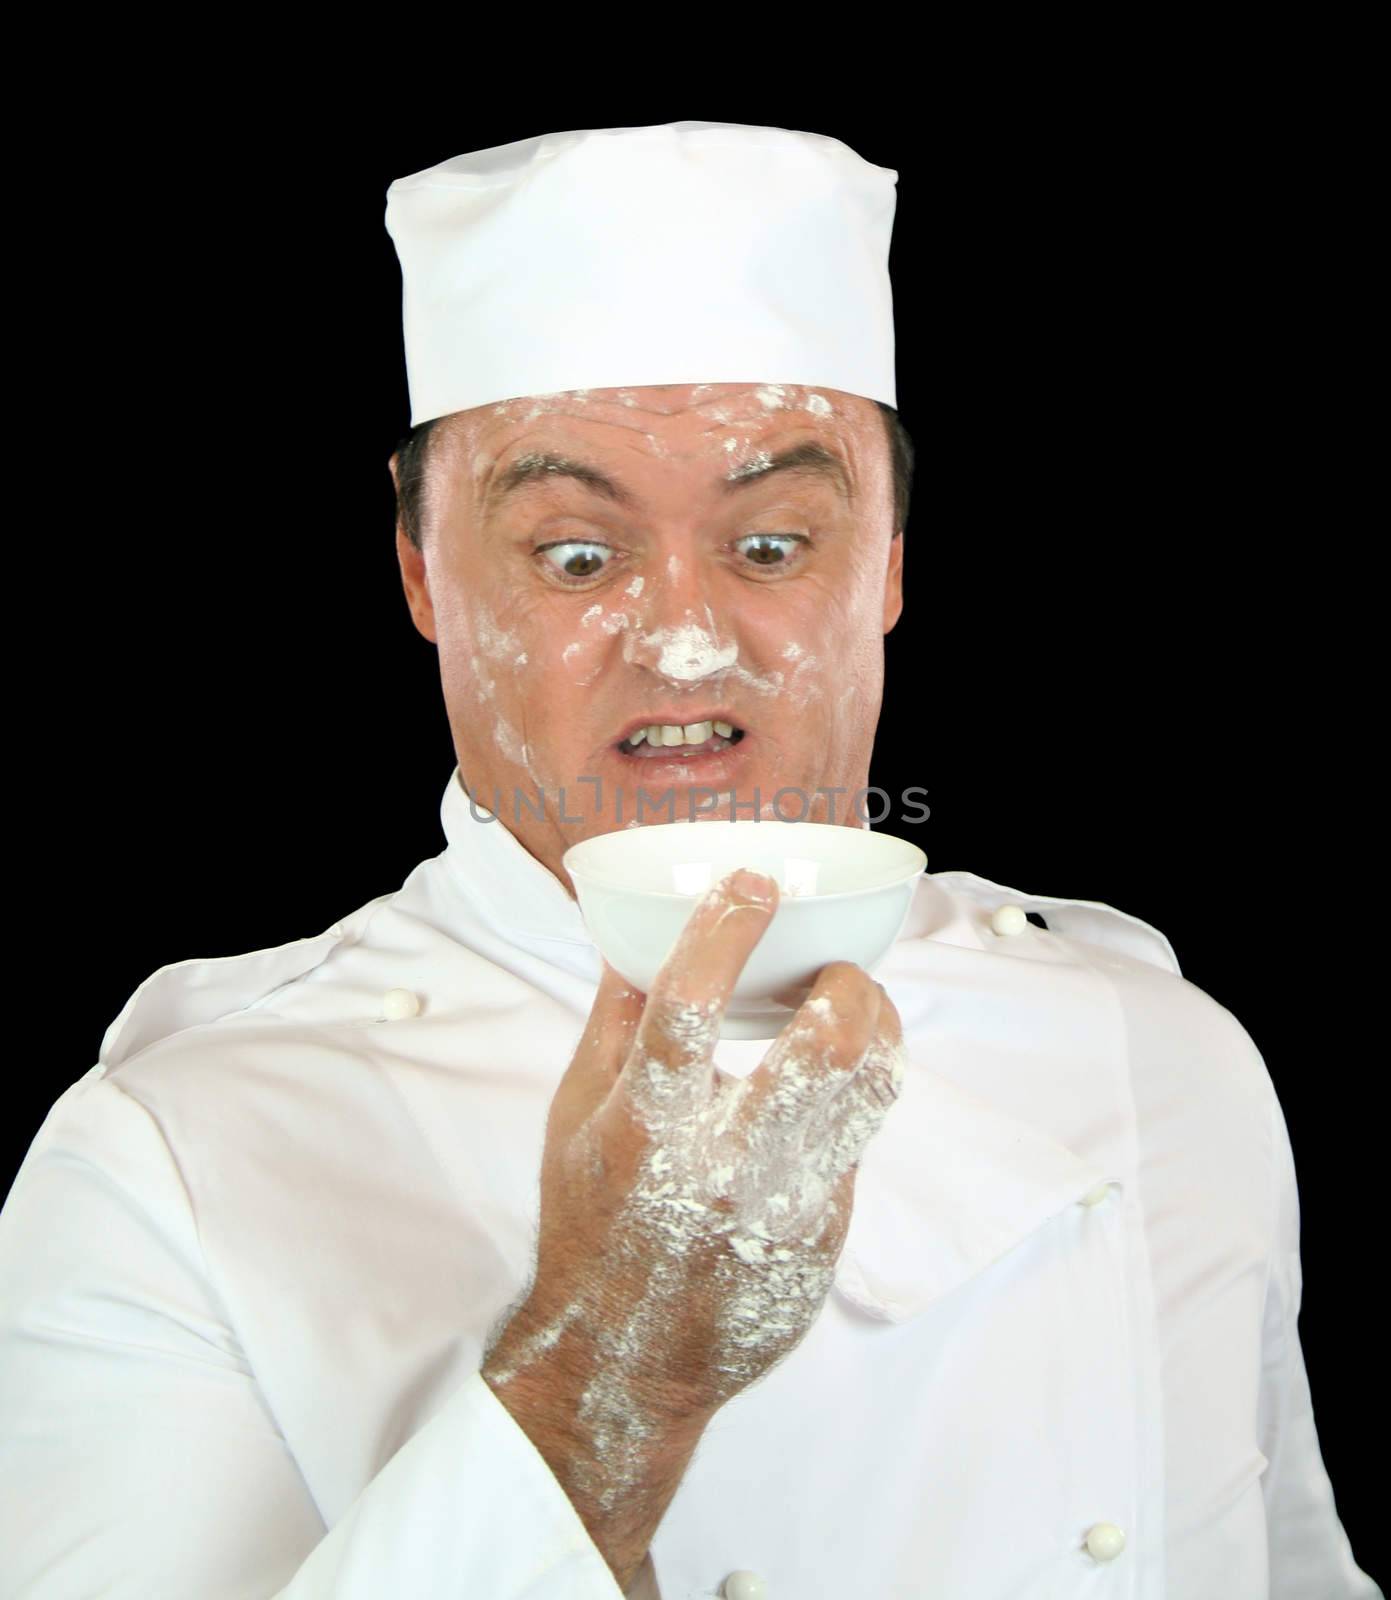 Chef is shocked when flour is blown up onto his face and hands.